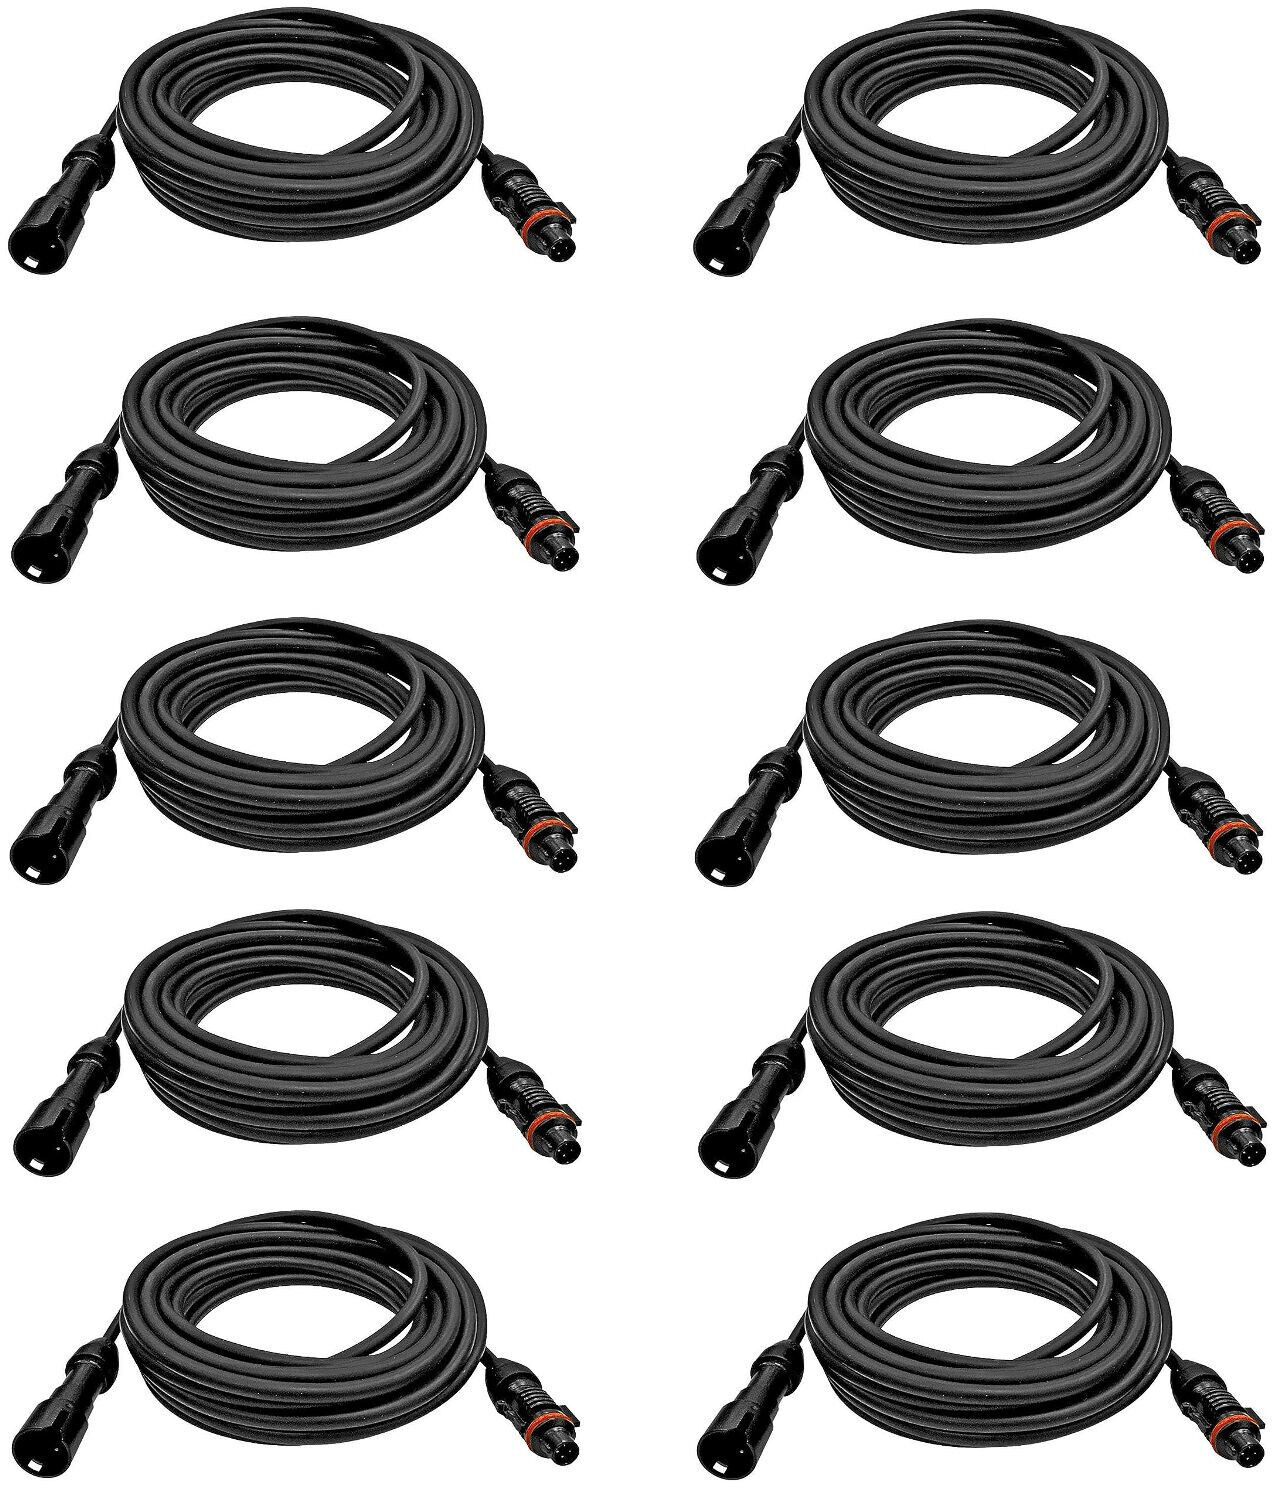 Voyager CEC15 Rear View LCD Monitor 15ft. Extension Cable (Pack of 10)